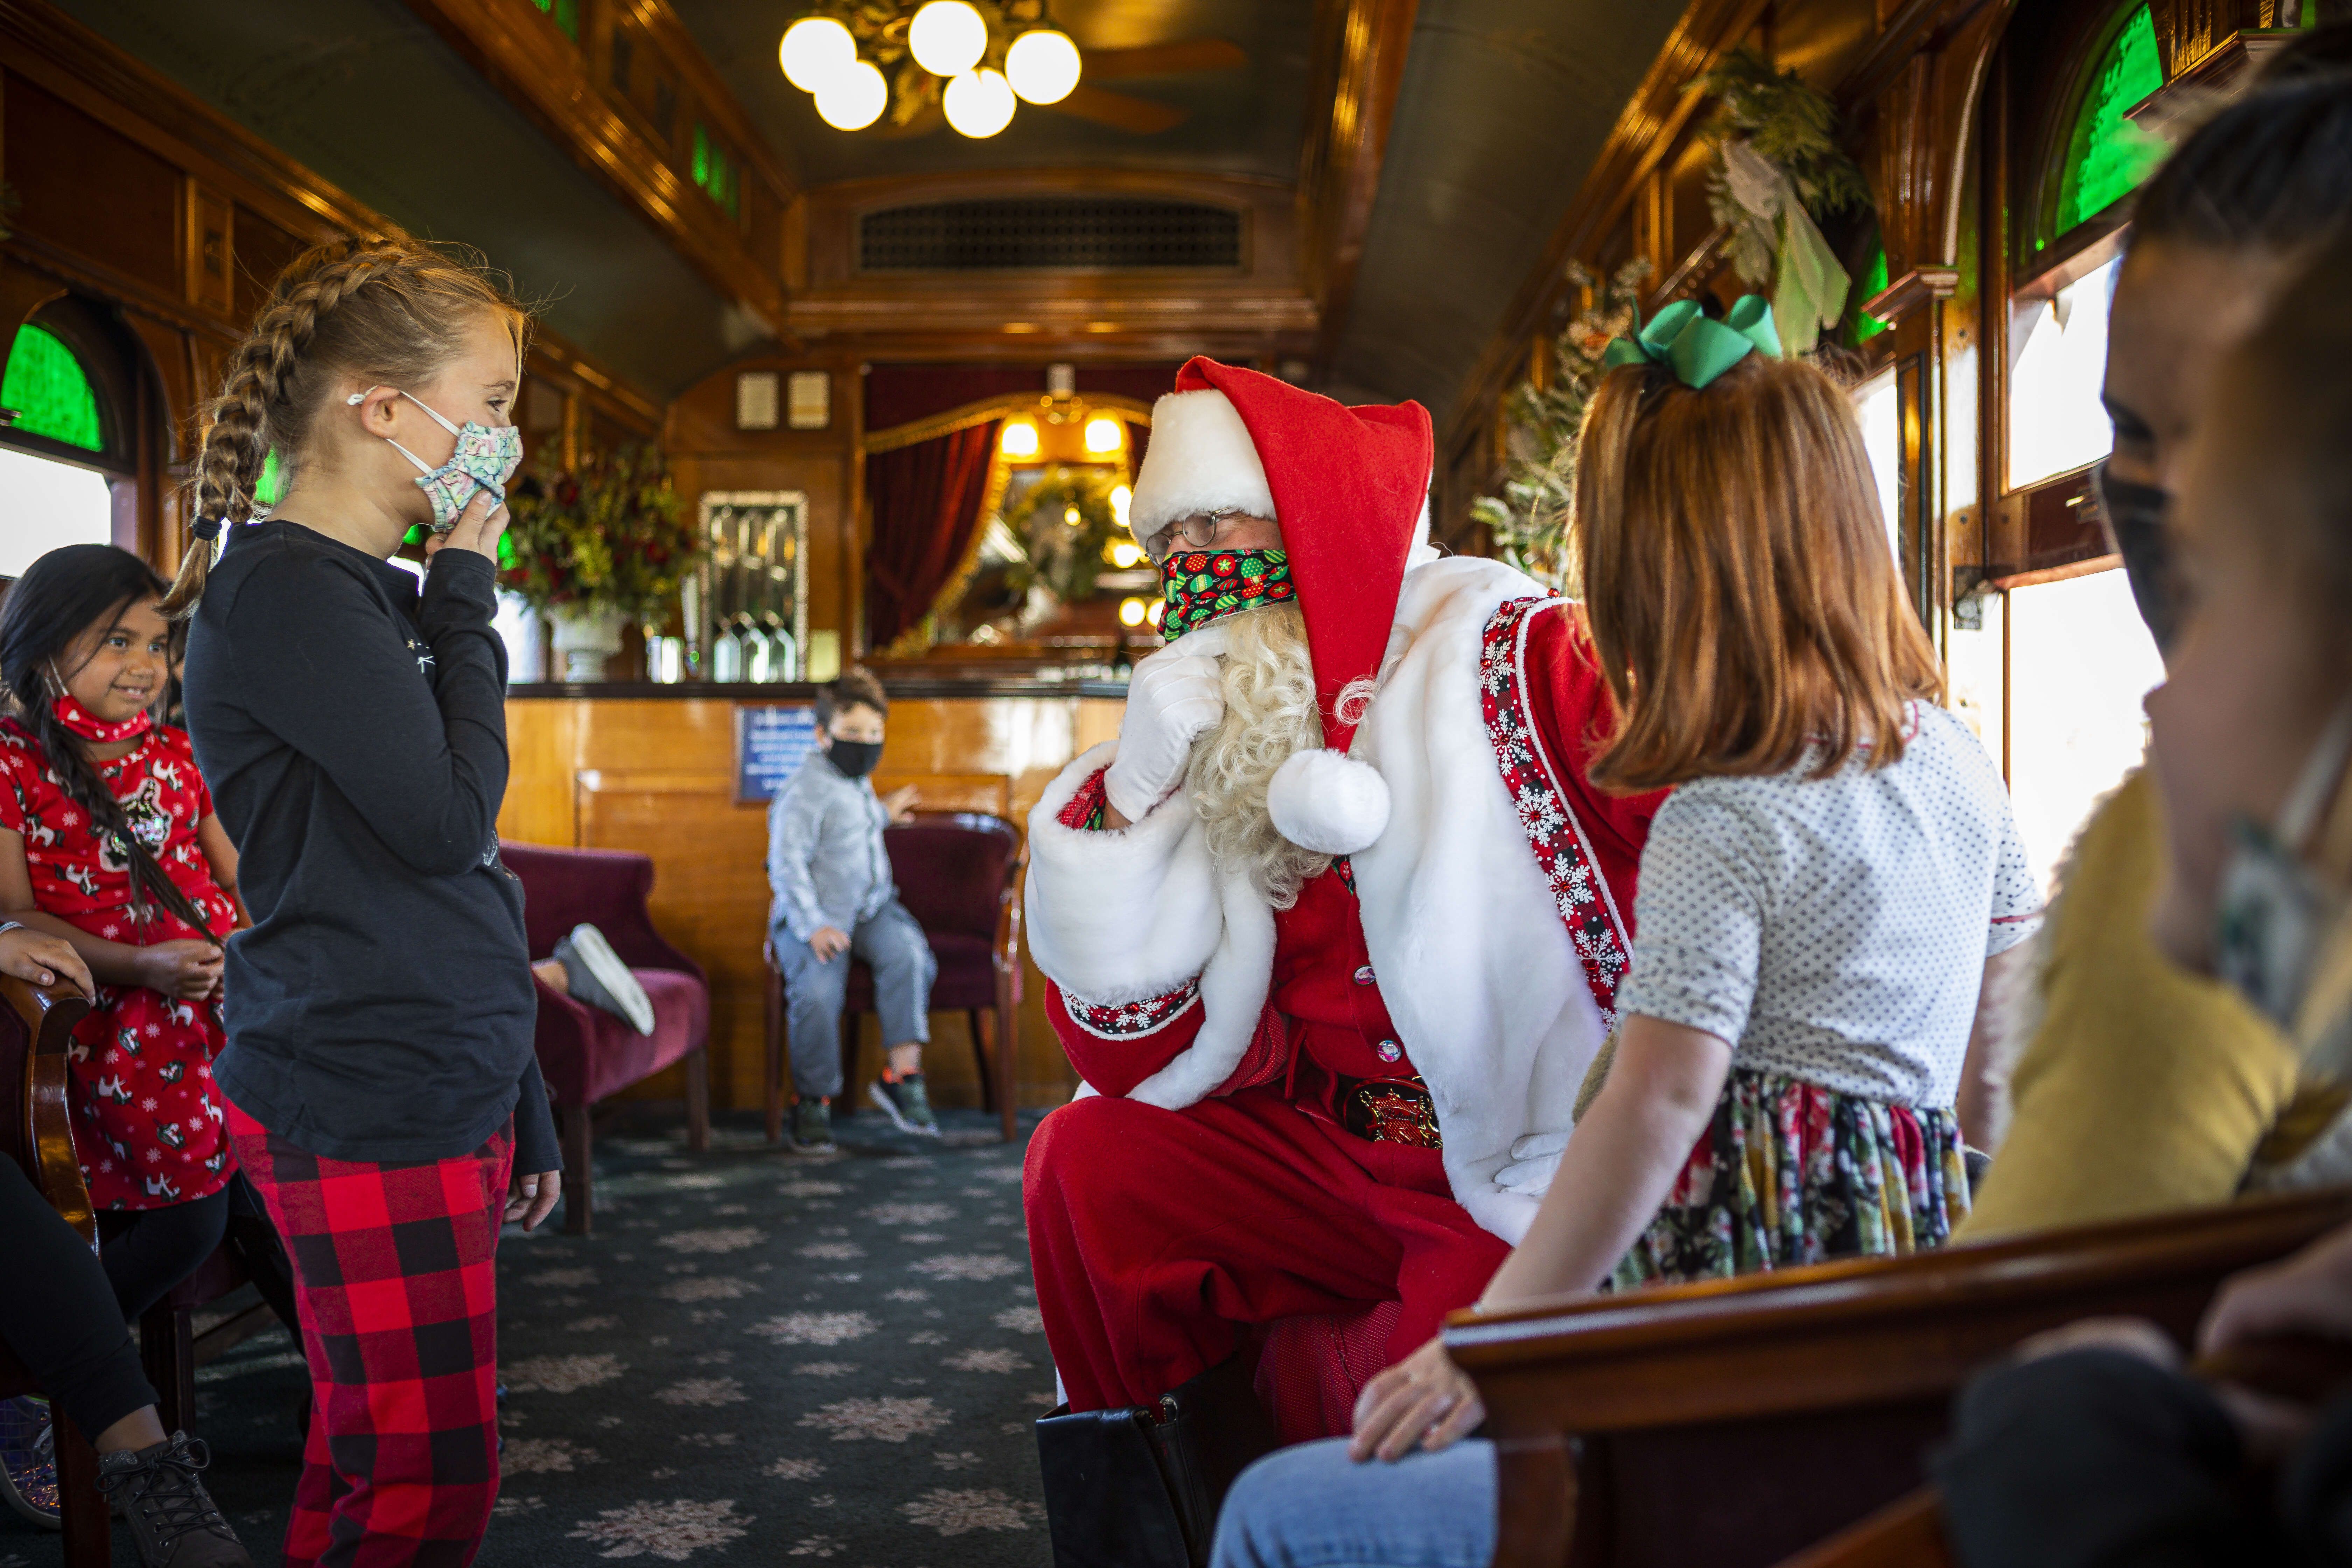 14 Best Christmas Train Rides 2020 - Holiday Train Rides in the US